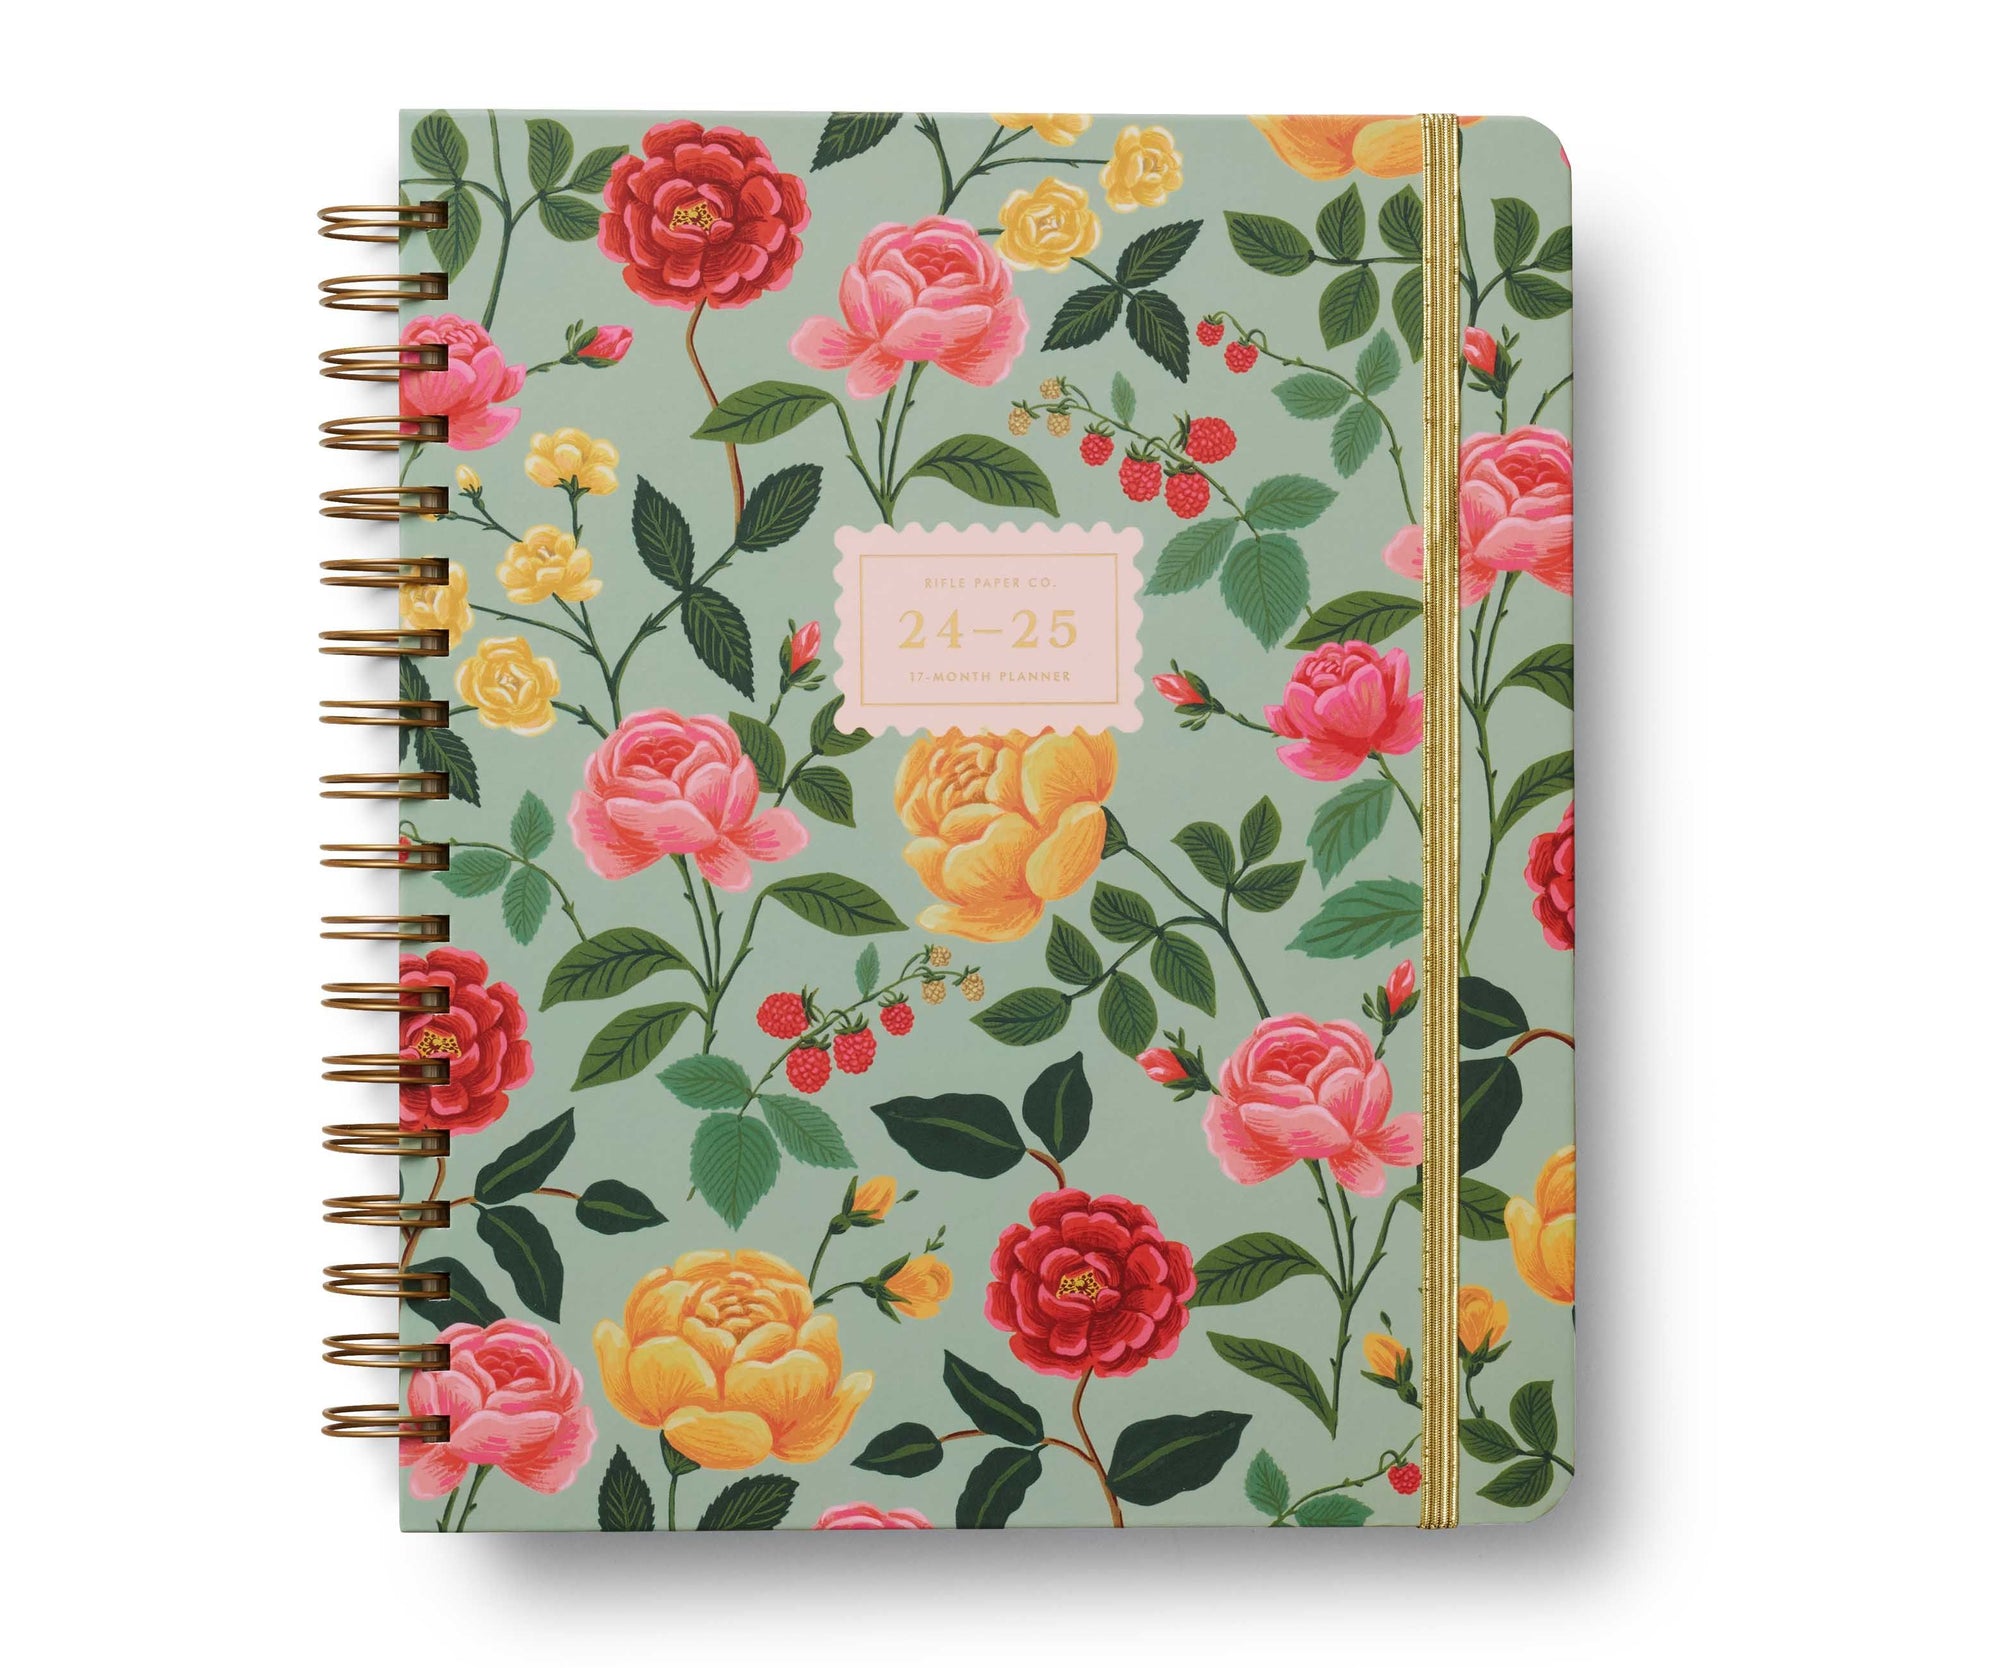 2025 Roses 17-Month Academic Hardcover Spiral Planner